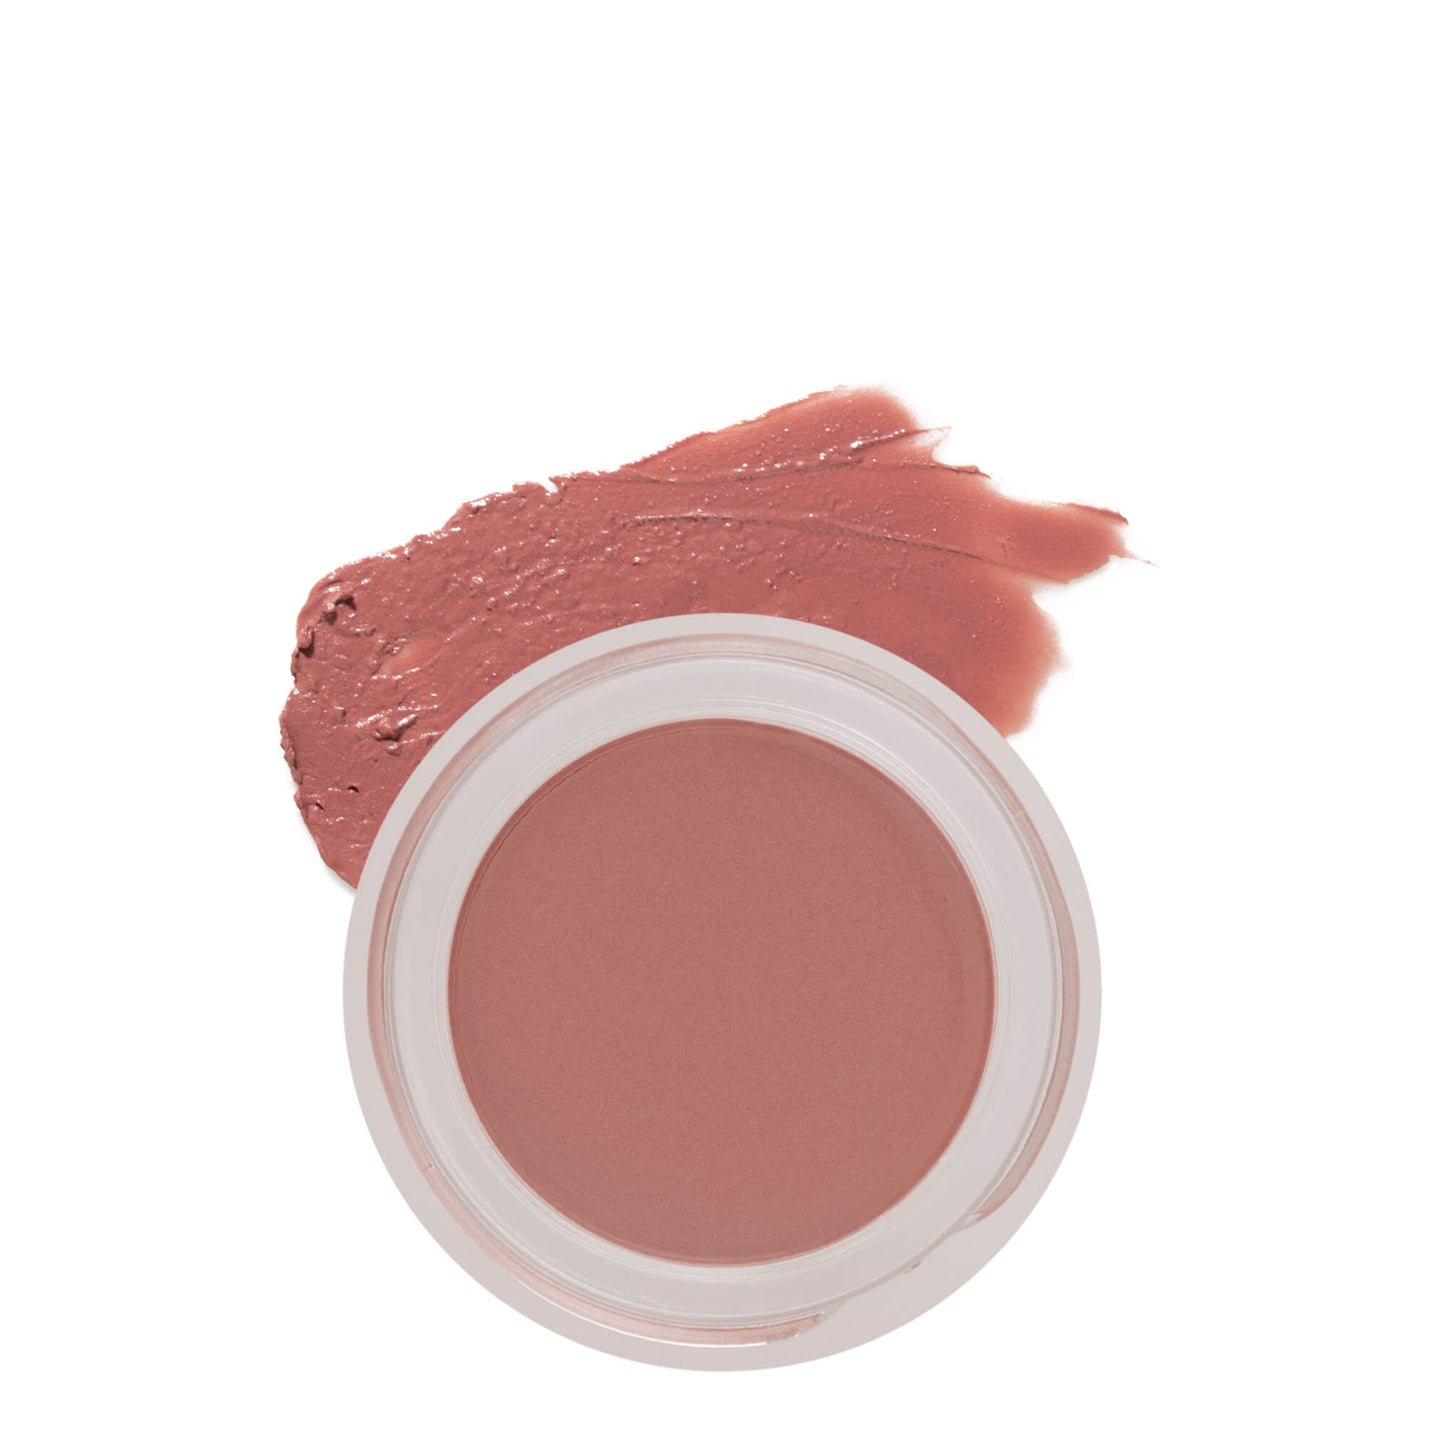 Superfood Face Tint (Fruit Tingle) | RAWW Cosmetics | Product + Swatch